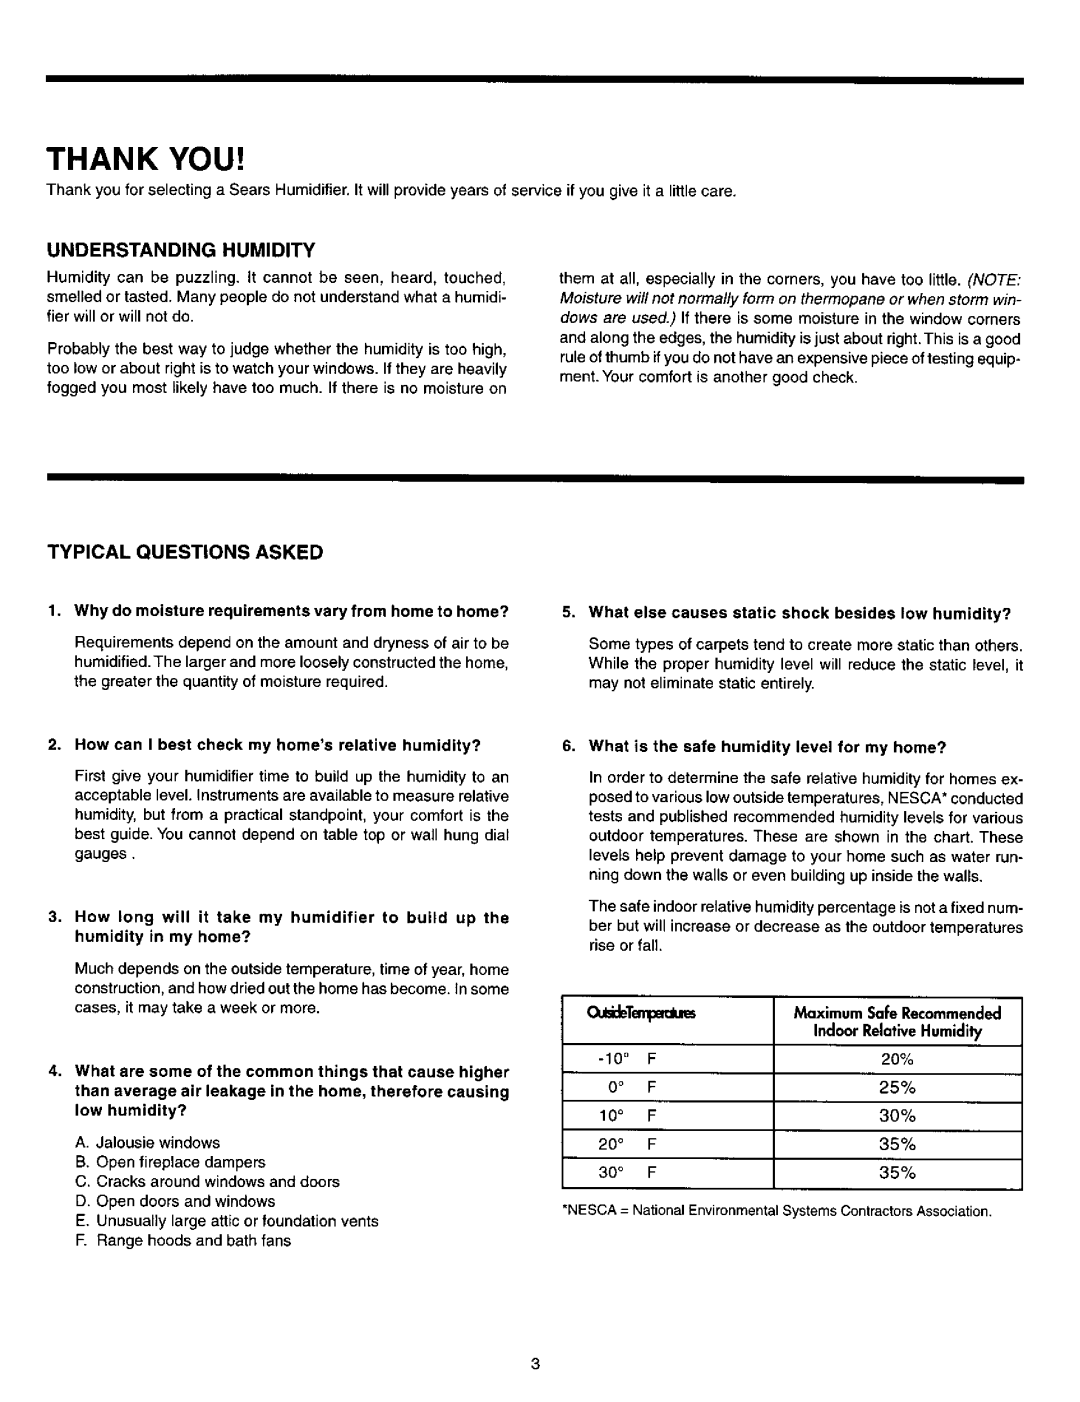 Sears 1700 manual Understanding Humidity, Typical Questions Asked 